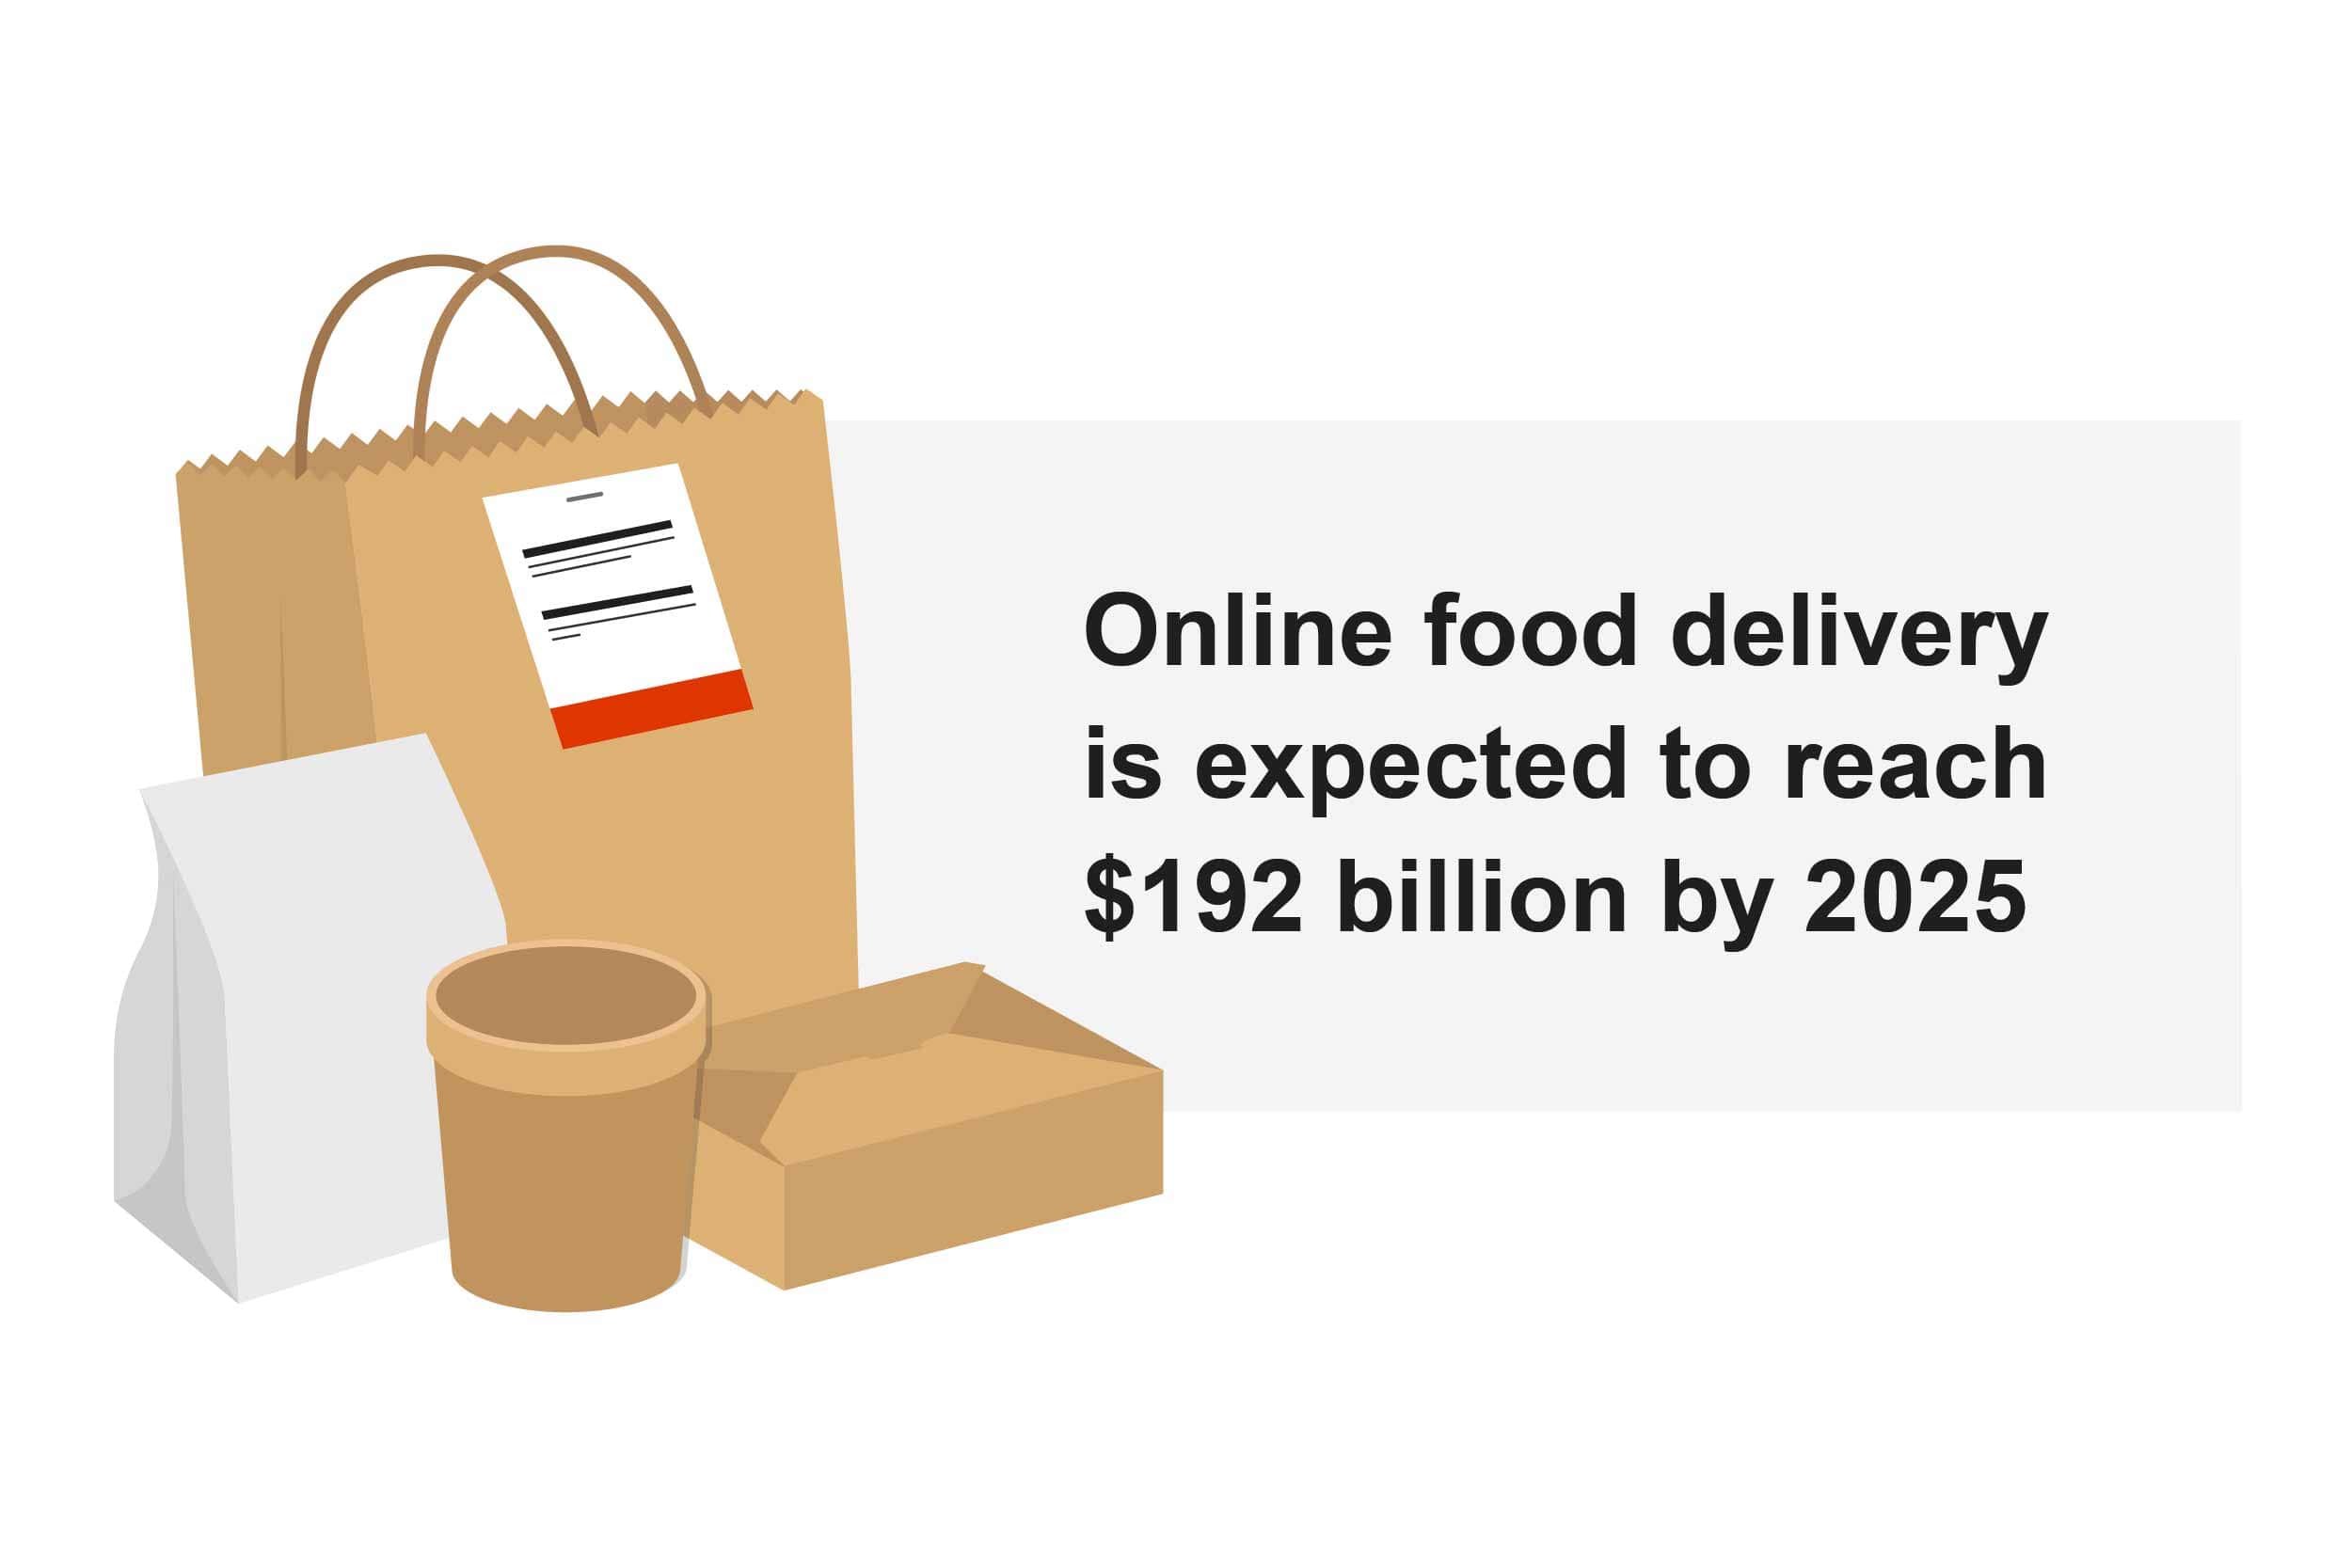 Online food delivery is expected to reach $192 billion by 2025.